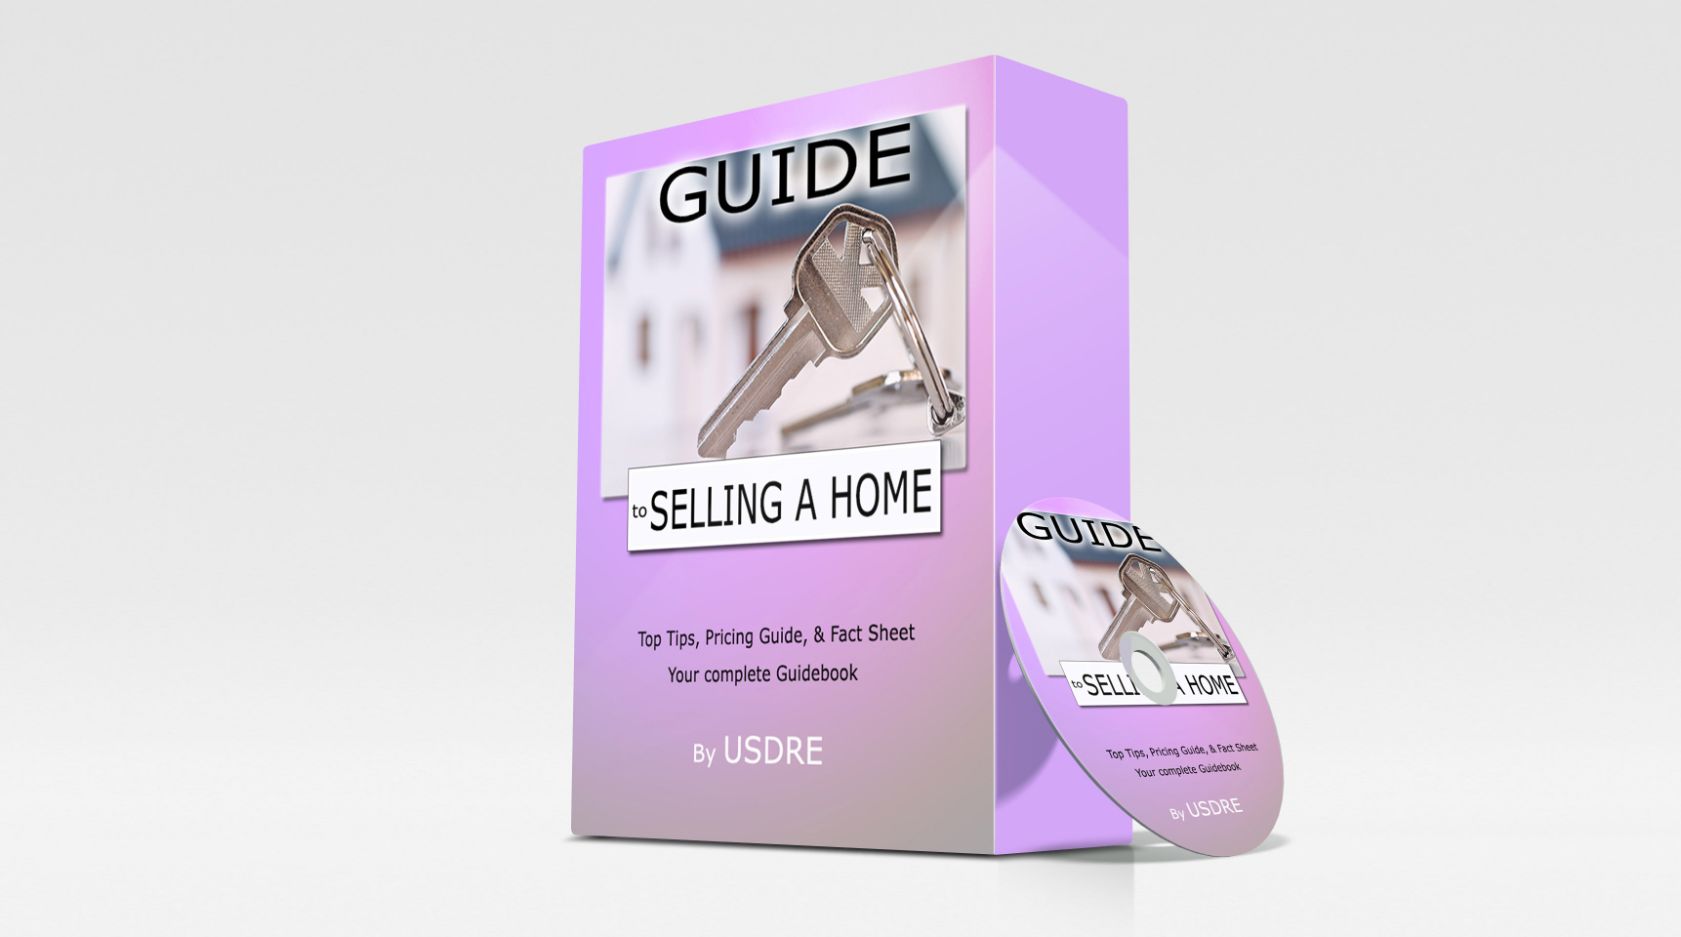 The US Directory of Real Estate Agents Launched Their Latest Guidebook to Help People Sell Their Home